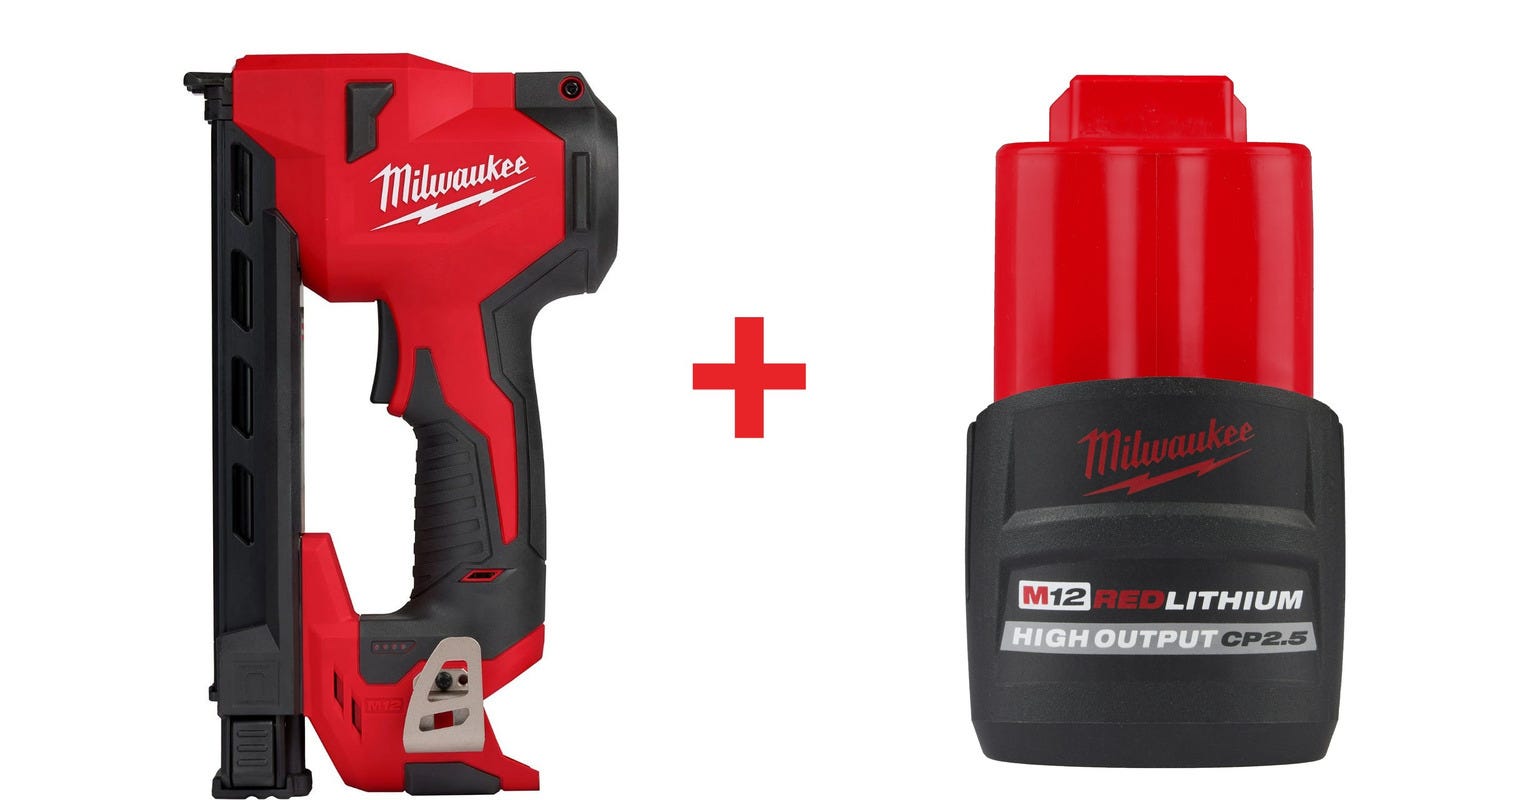 Milwaukee M12 Cable Stapler plus M12 REDLITHIUM HIGH OUTPUT CP 2.5Ah  Battery Pack